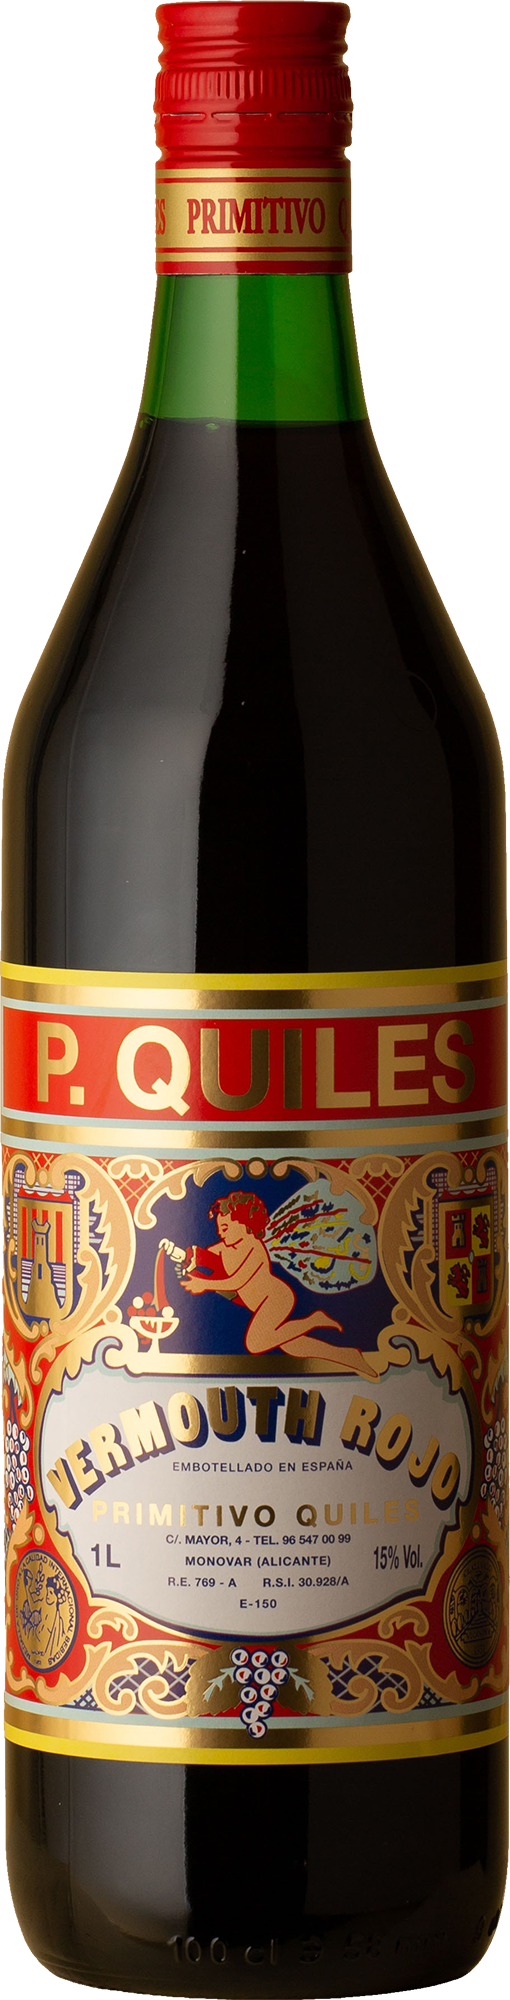 Primitivo Quiles - Vermouth 1L Not Wine